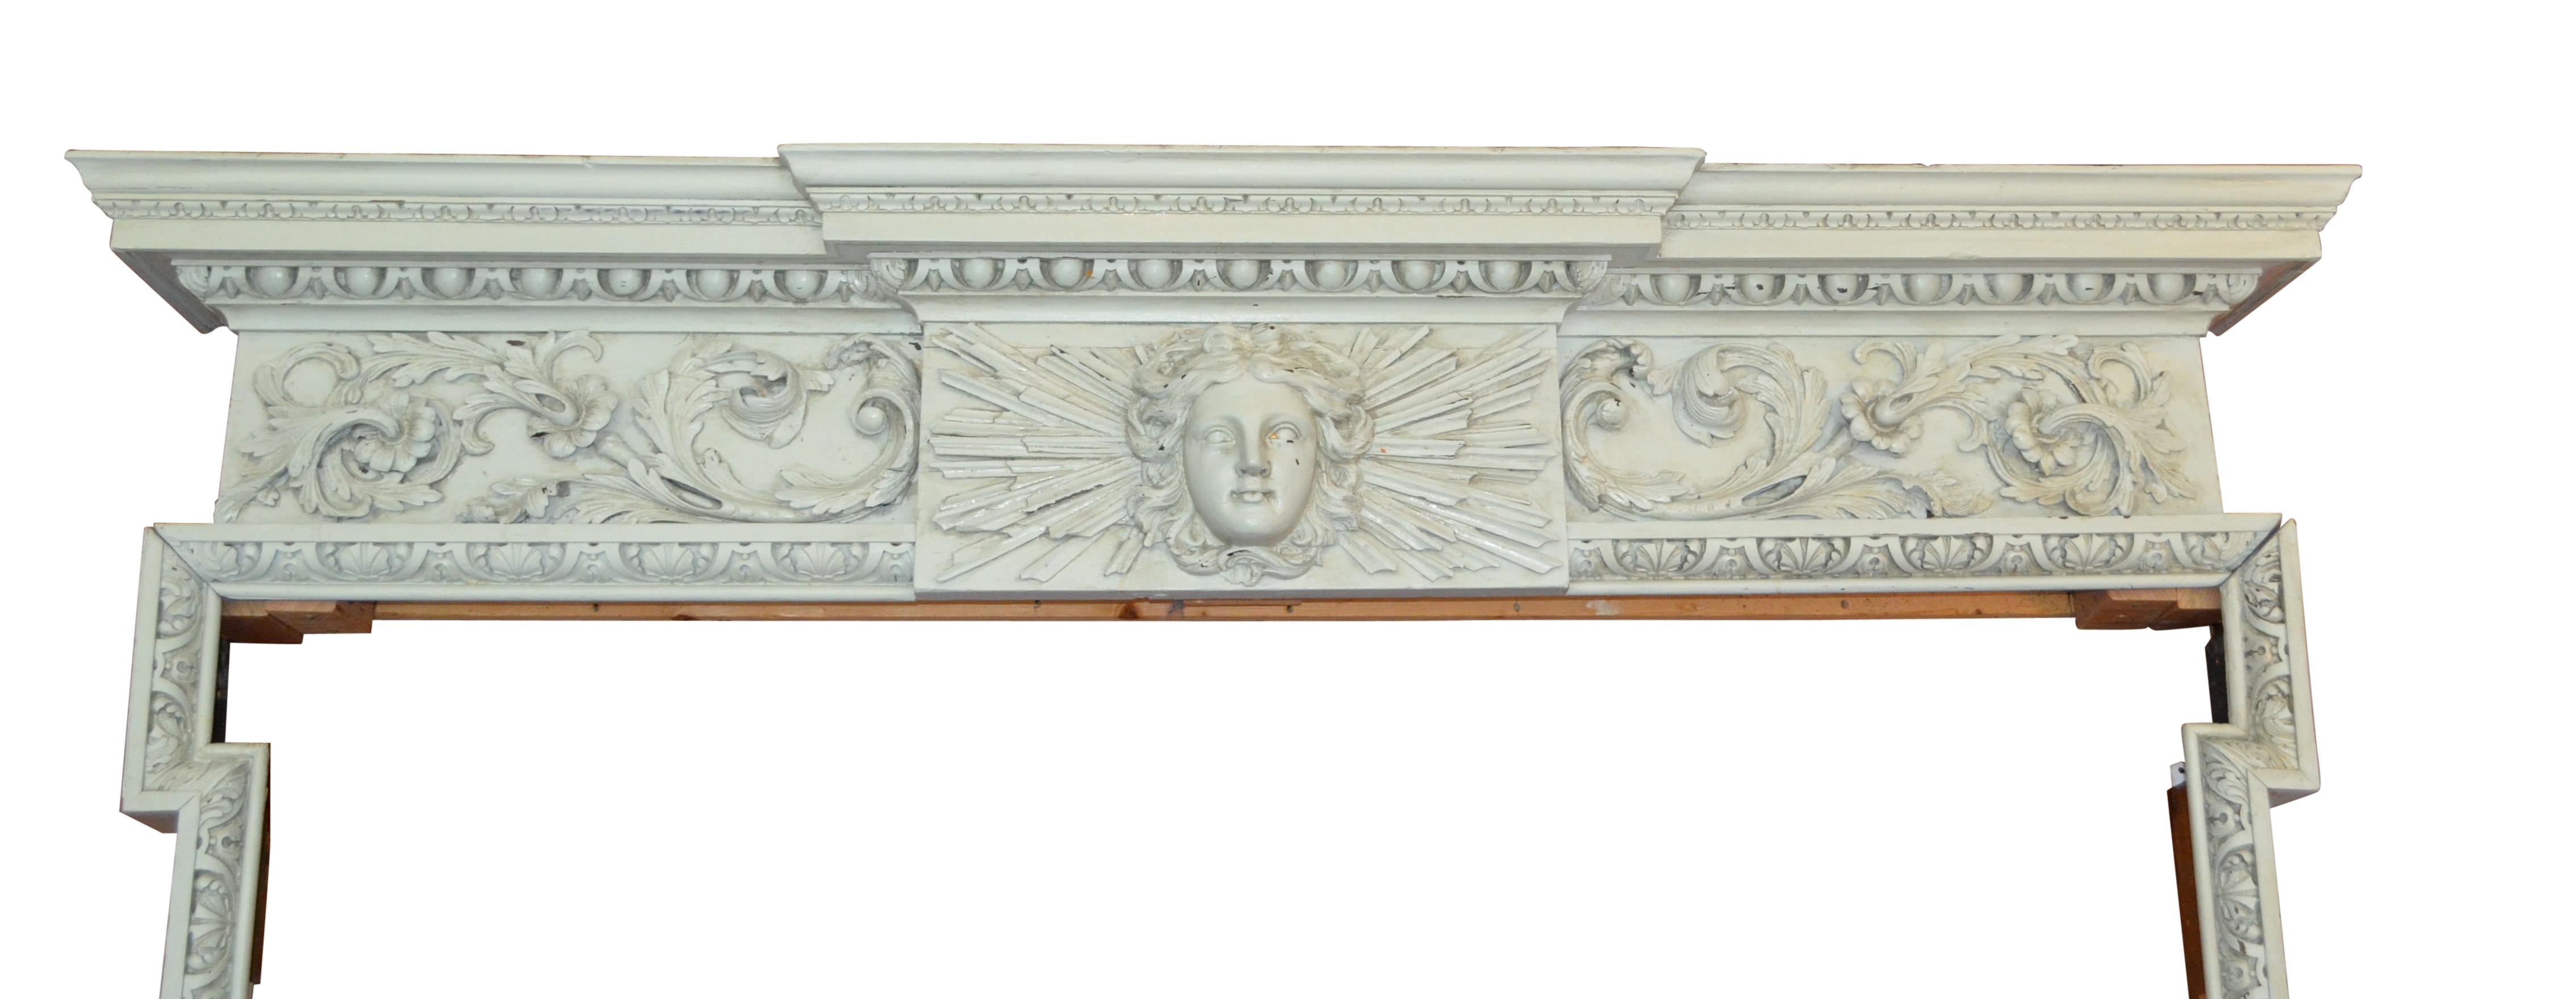 Georgian Carved and Painted Pinewood, 18 Century Fireplace Mantle or Chimneypiece For Sale